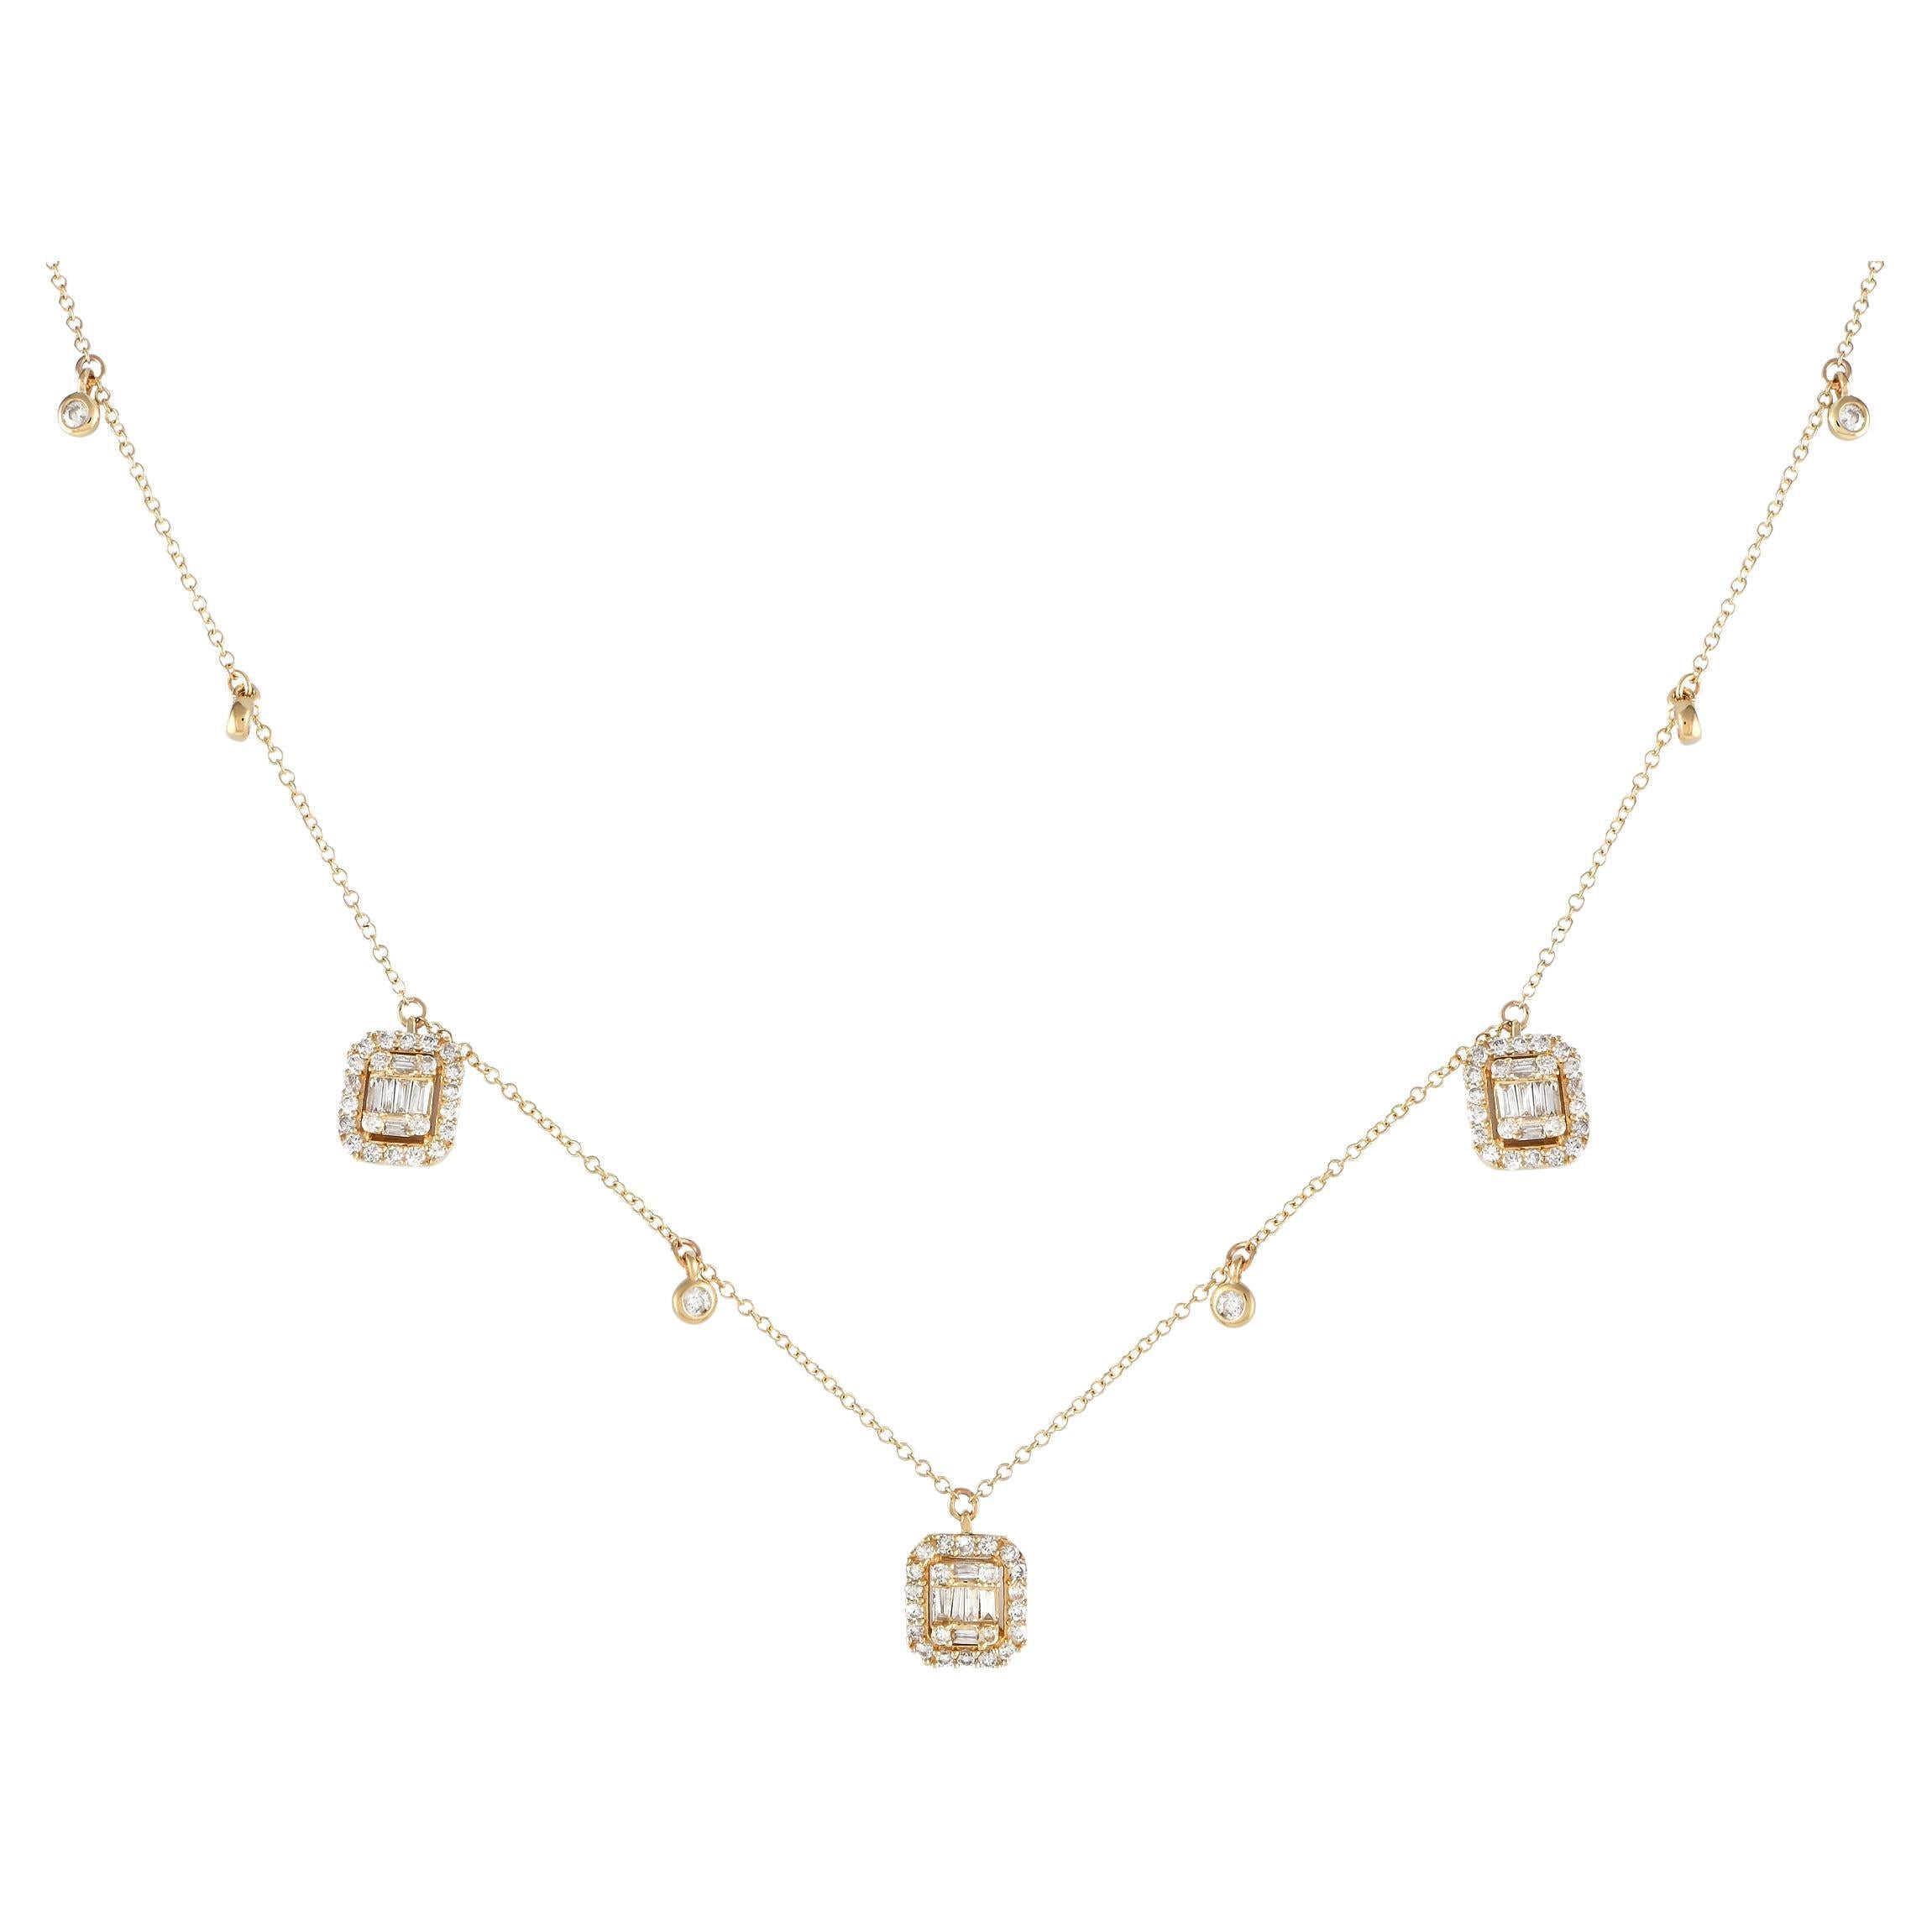 LB Exclusive 14K Yellow Gold 0.58ct Diamond Station Necklace PN14842